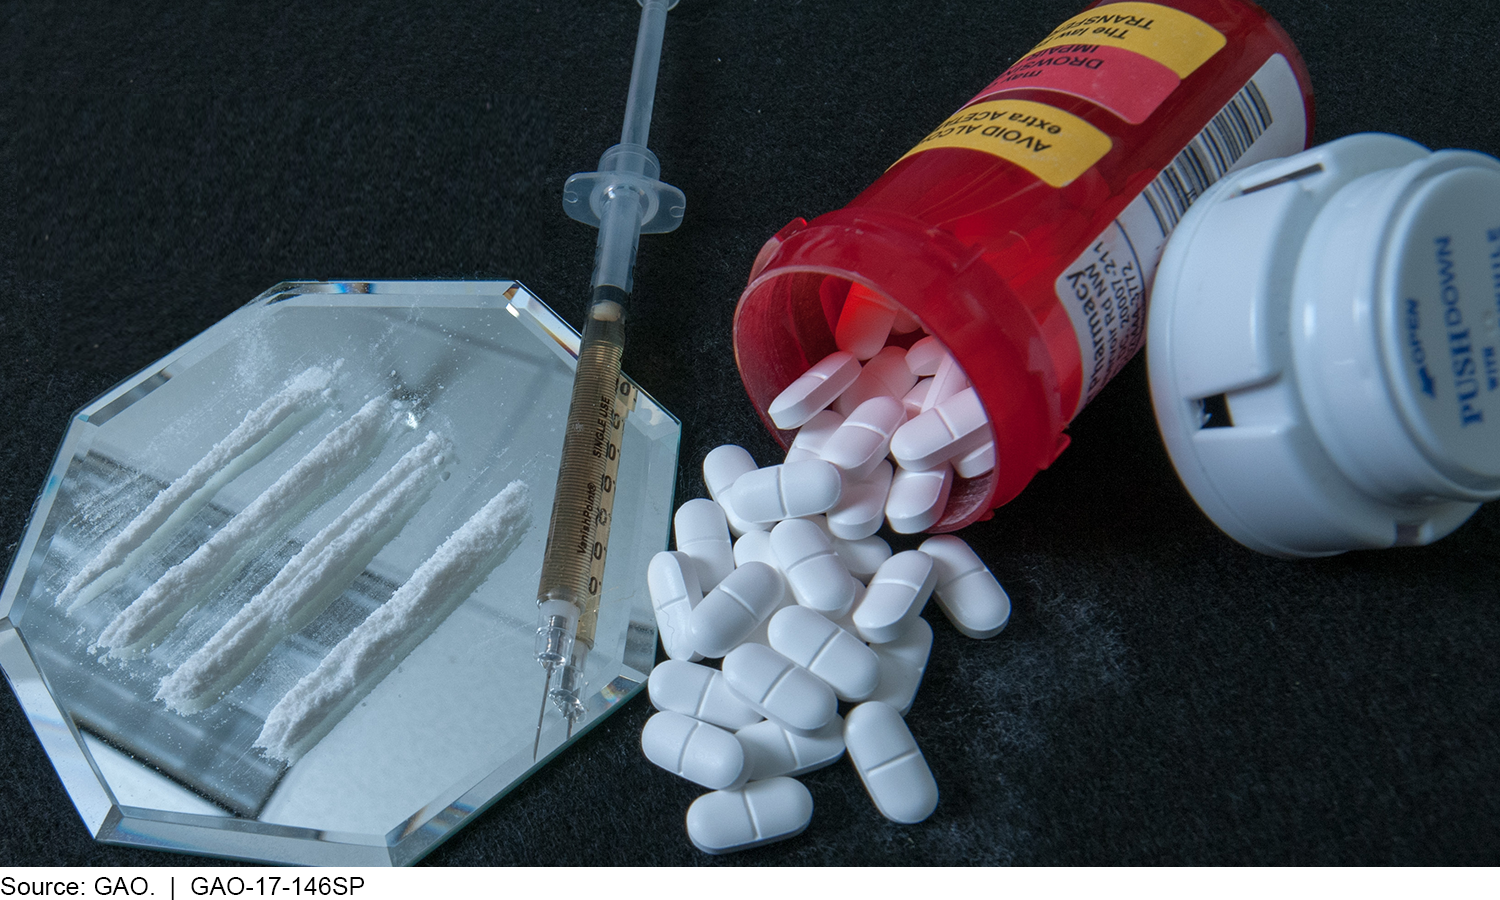 Photo of a mirror with lines of white powder, a needle, pills spilling out of a prescription bottle.